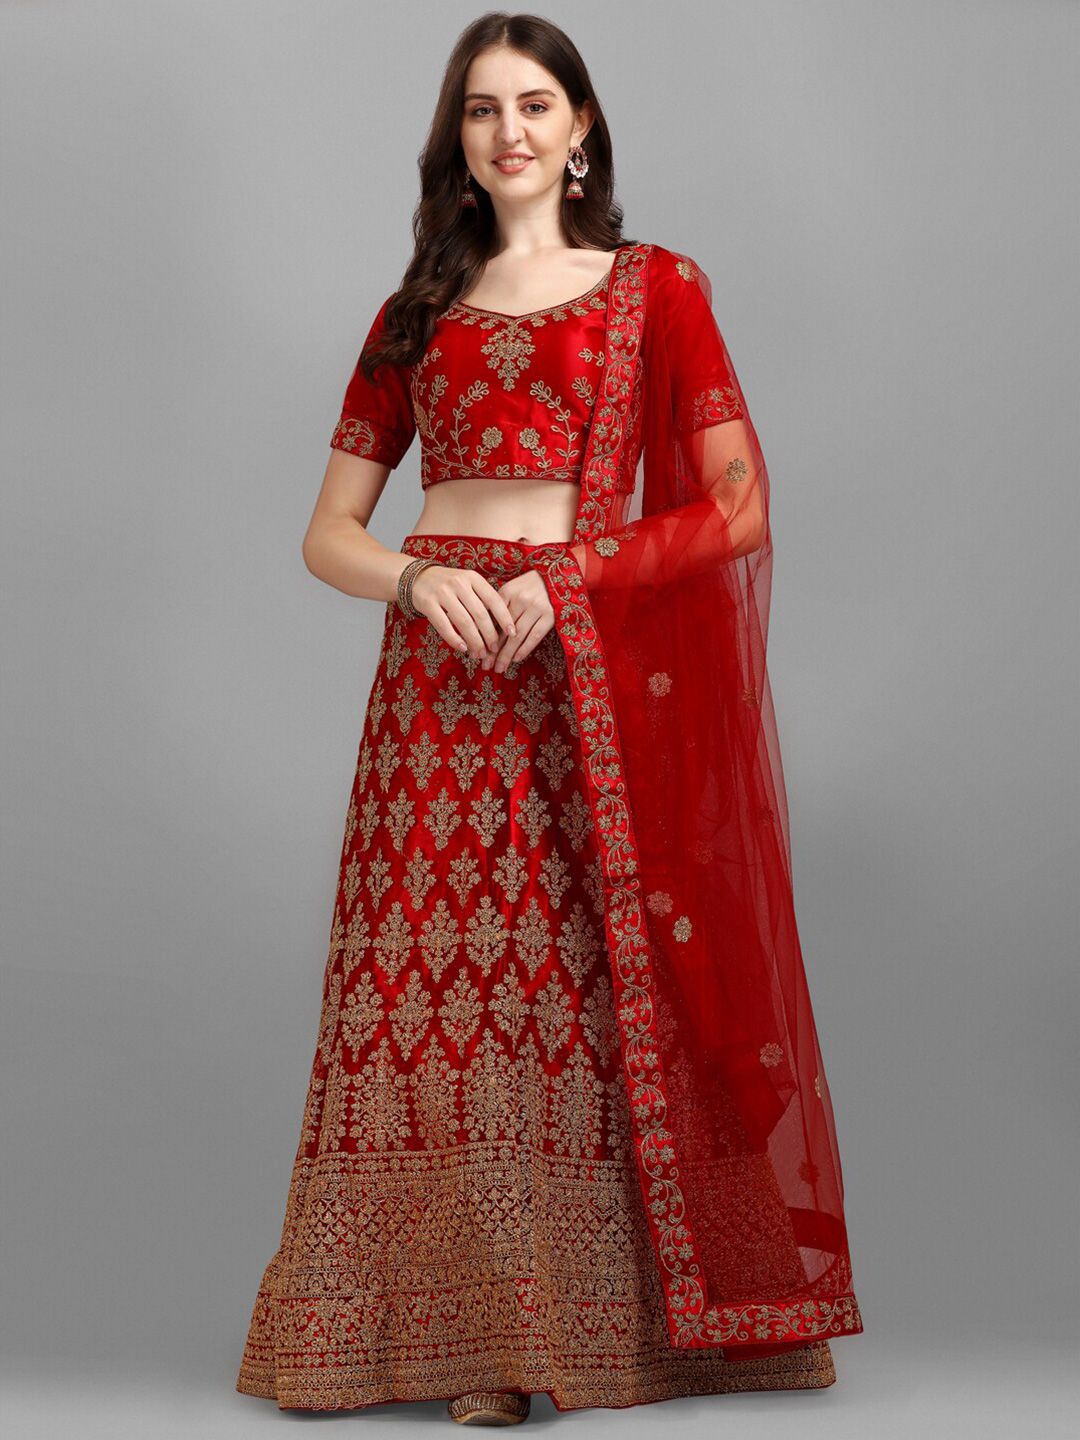 LABEL AARNA Red & Gold-Toned Embroidered Thread Work Semi-Stitched Lehenga & Unstitched Blouse With Dupatta Price in India